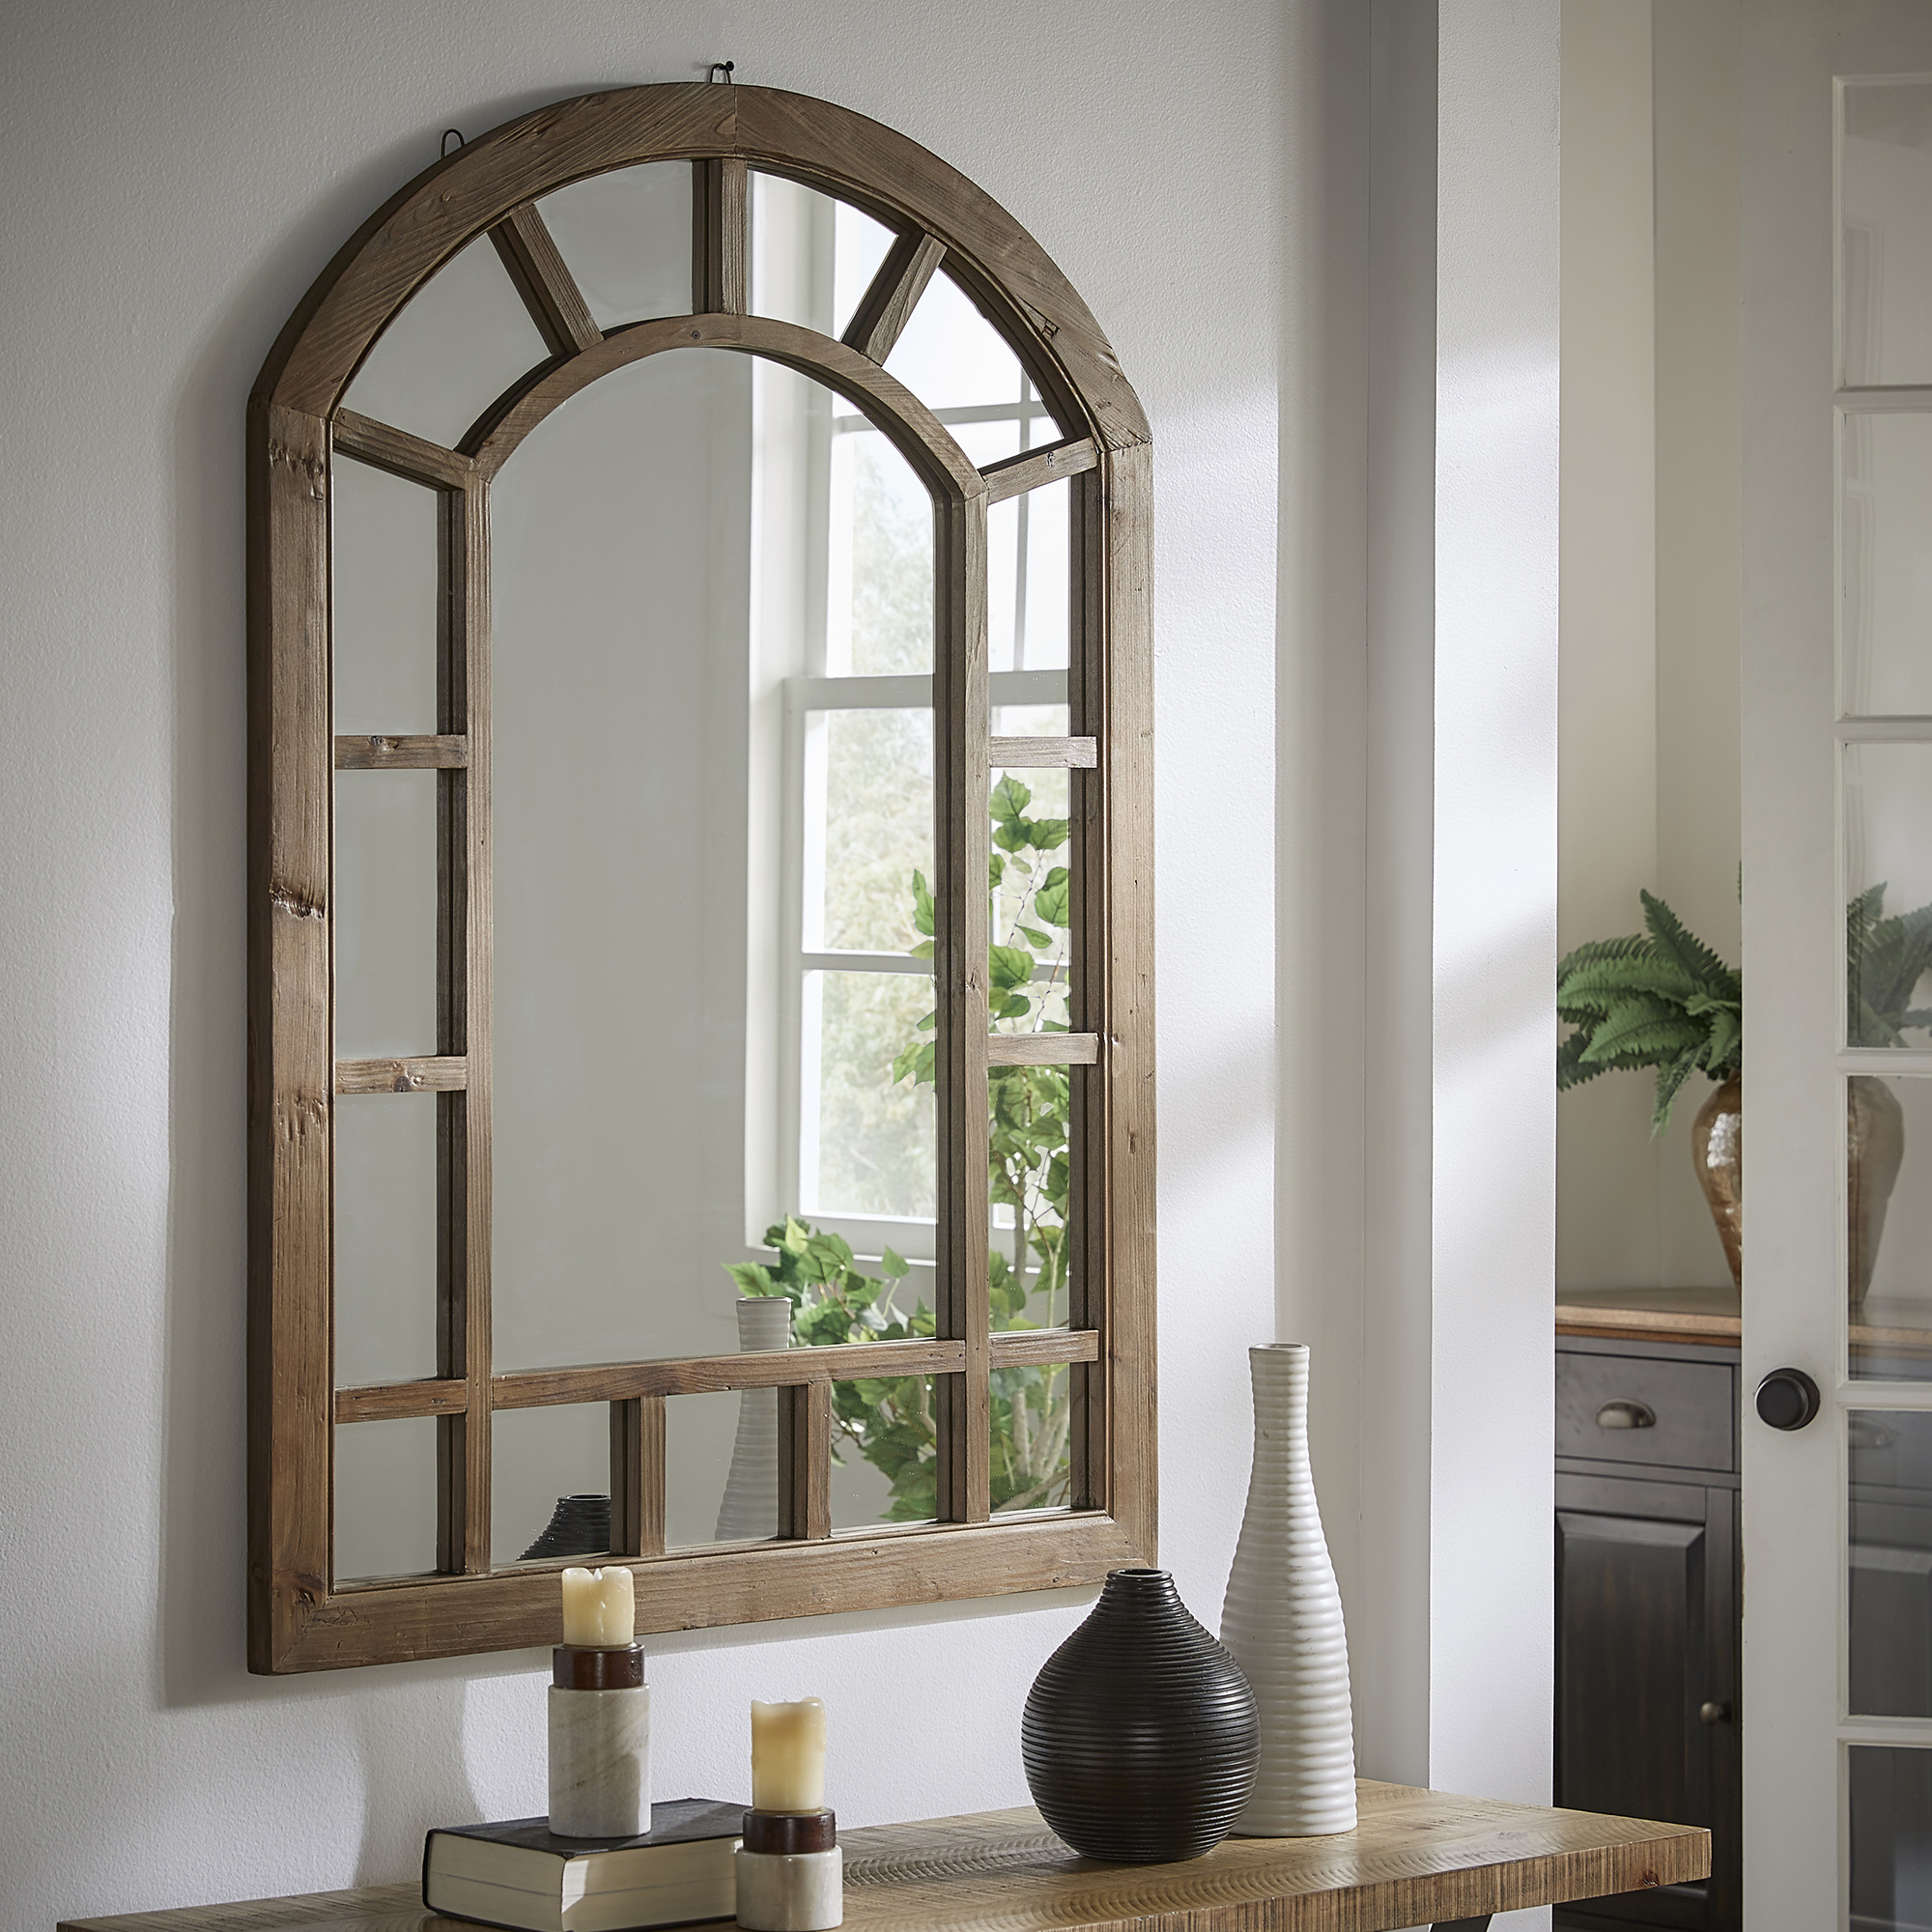 Reclaimed Wood Arched Windowpane Wall Mirror